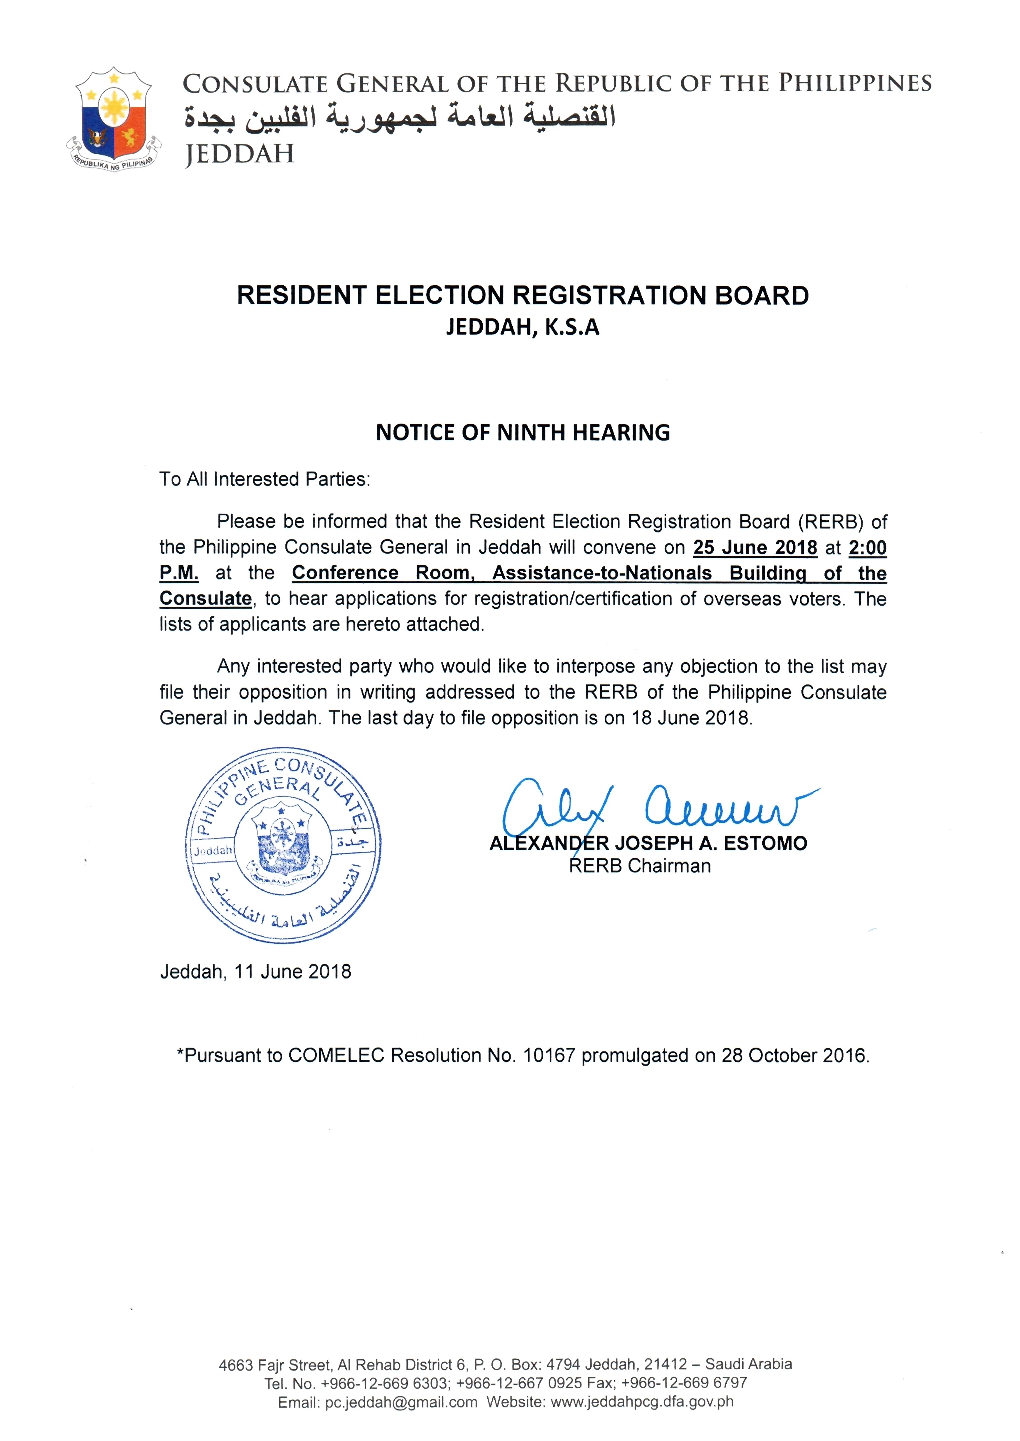 Notice of Ninth Hearing